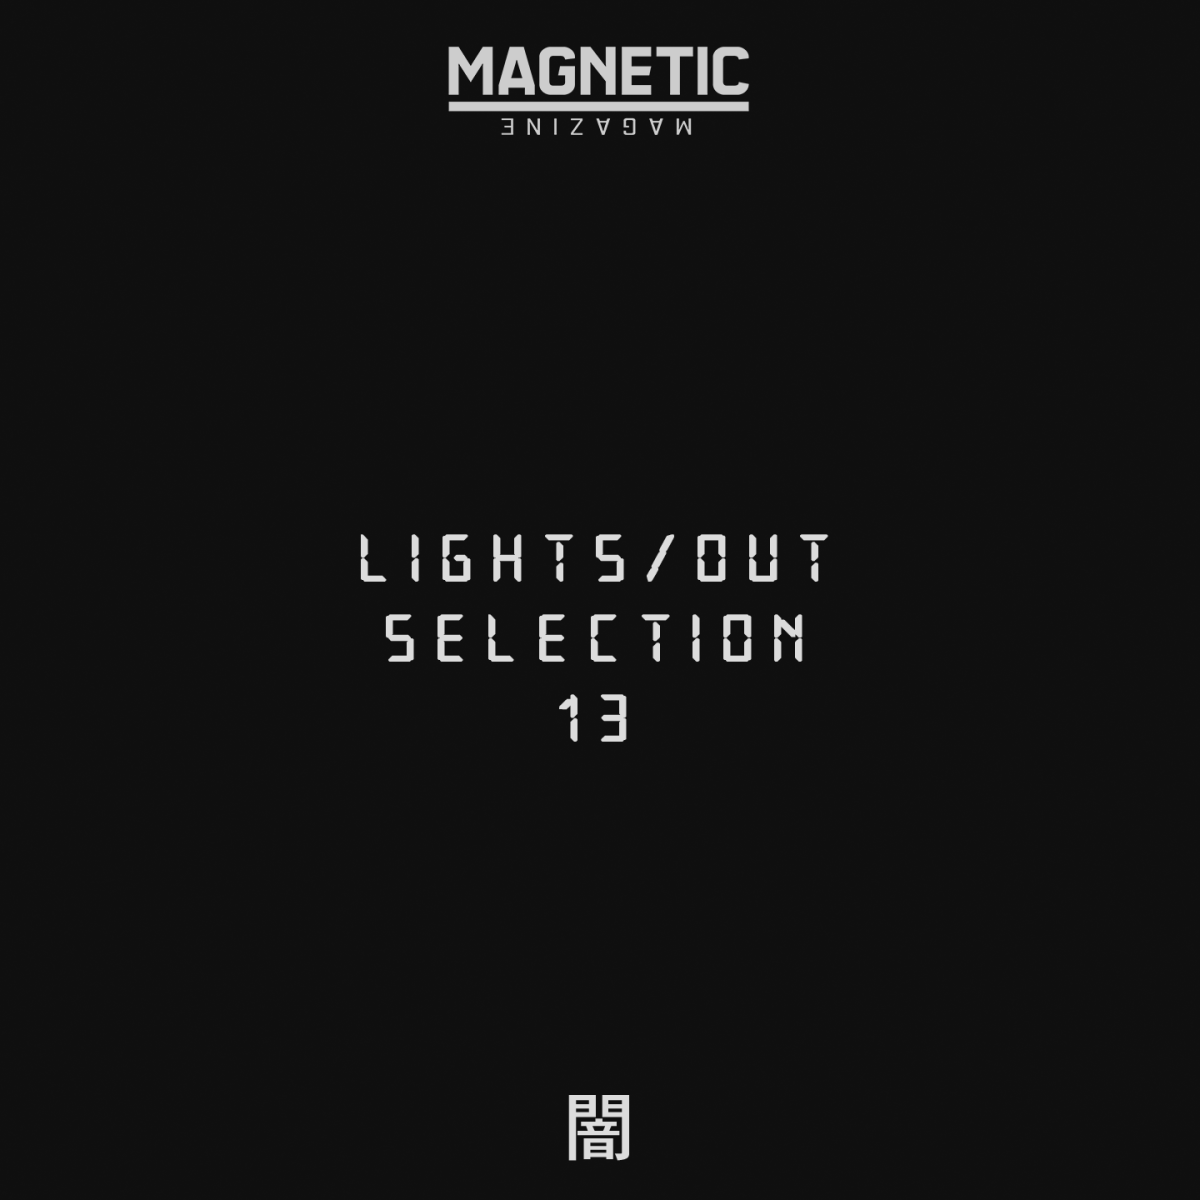 lights-out-selection-13